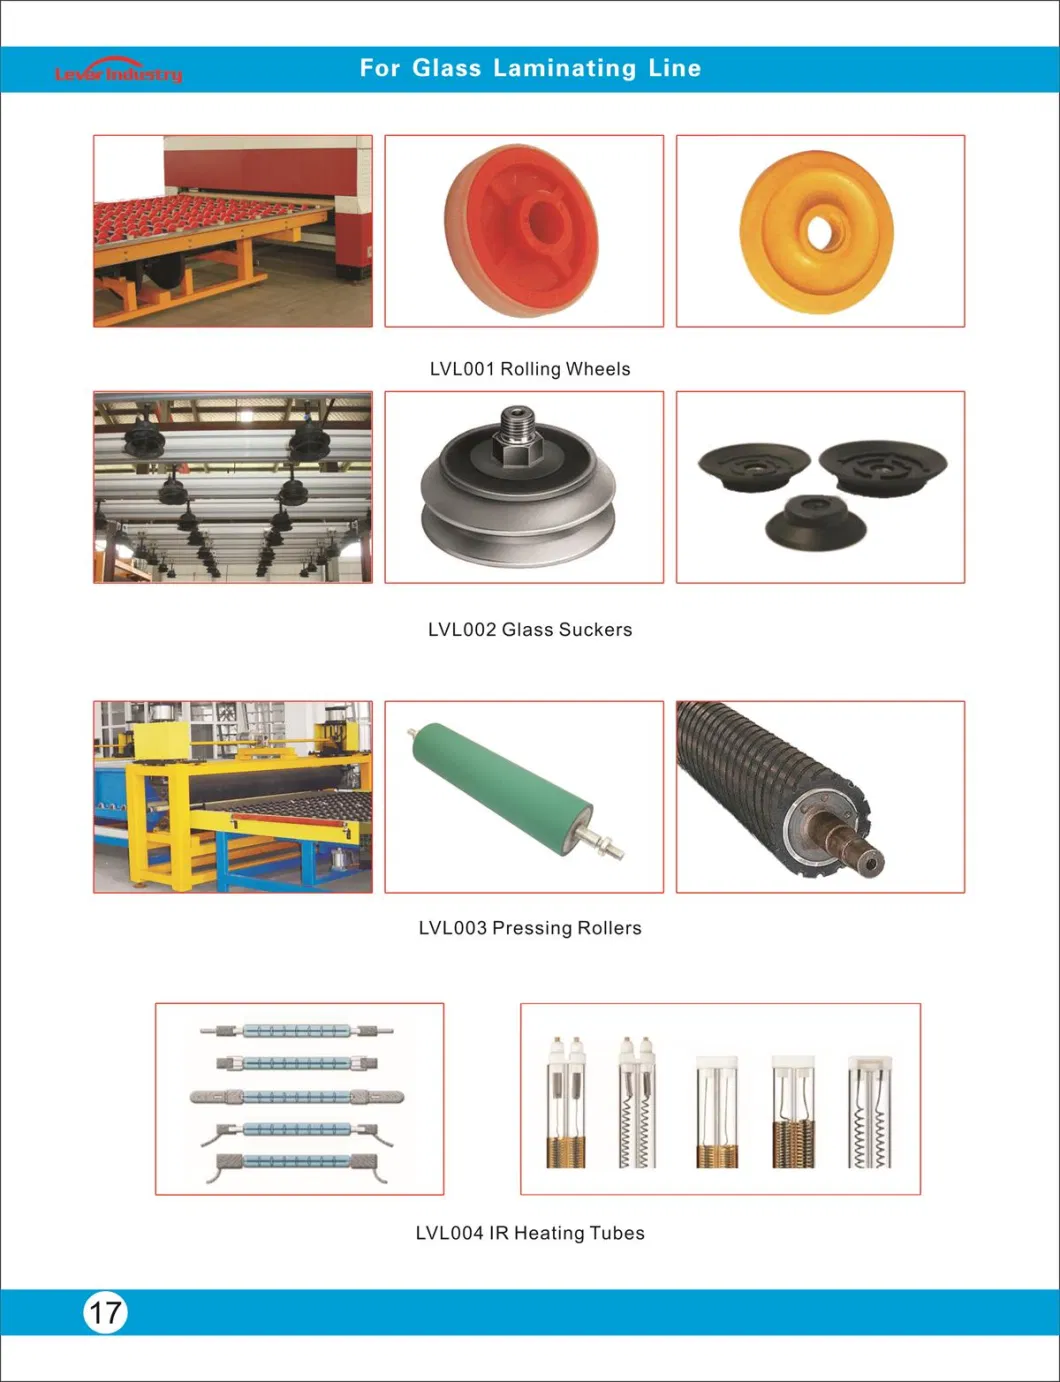 Spare Parts for Glass Laminating Furnace, Parts for Glass Laminating Line,